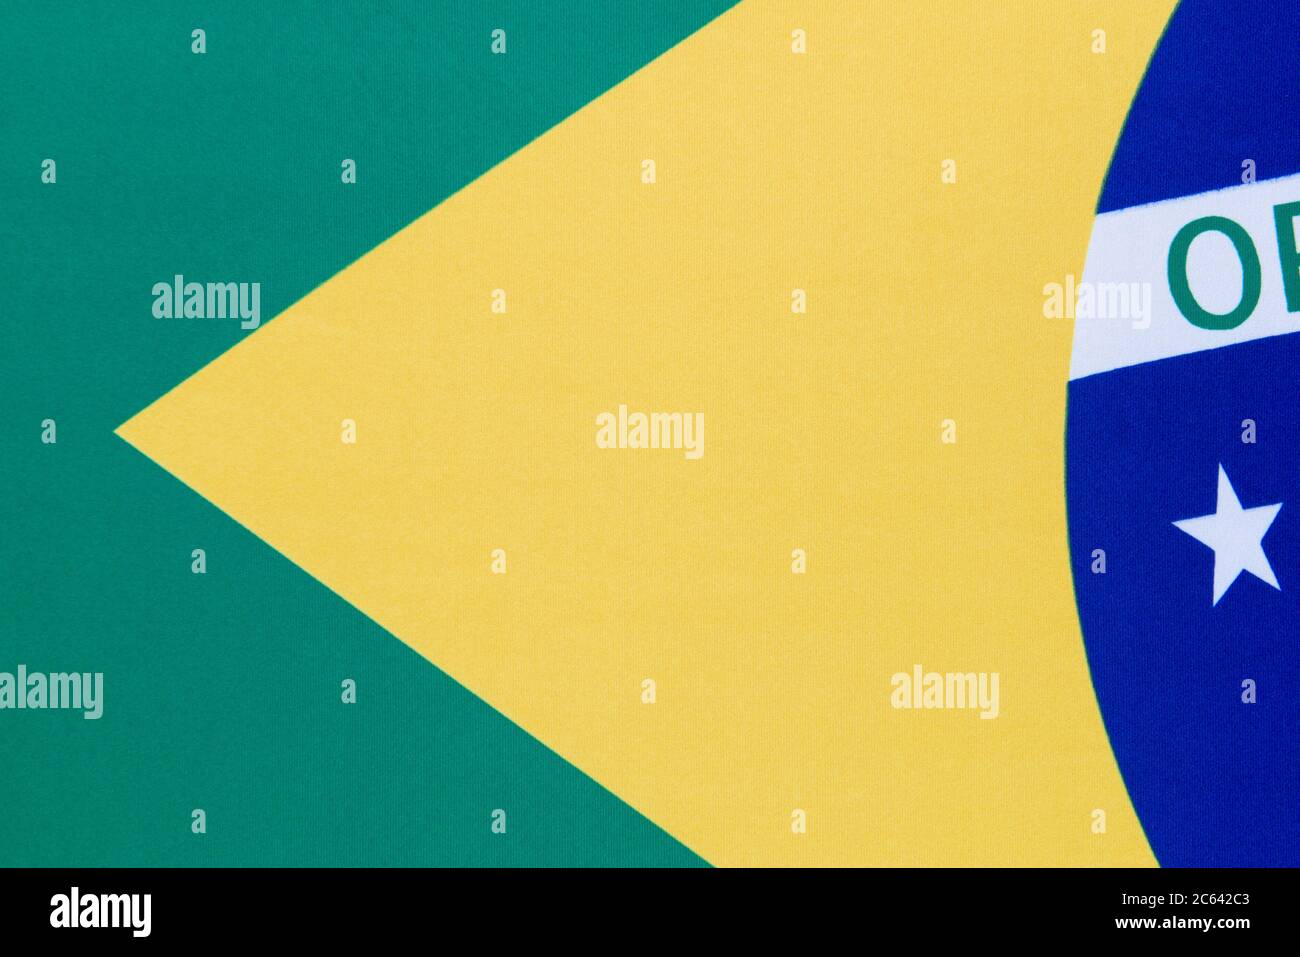 Cropped view of the Brazilian flag. Each star represents a Brazilian state. There are 26 stars on the flag. Stock Photo